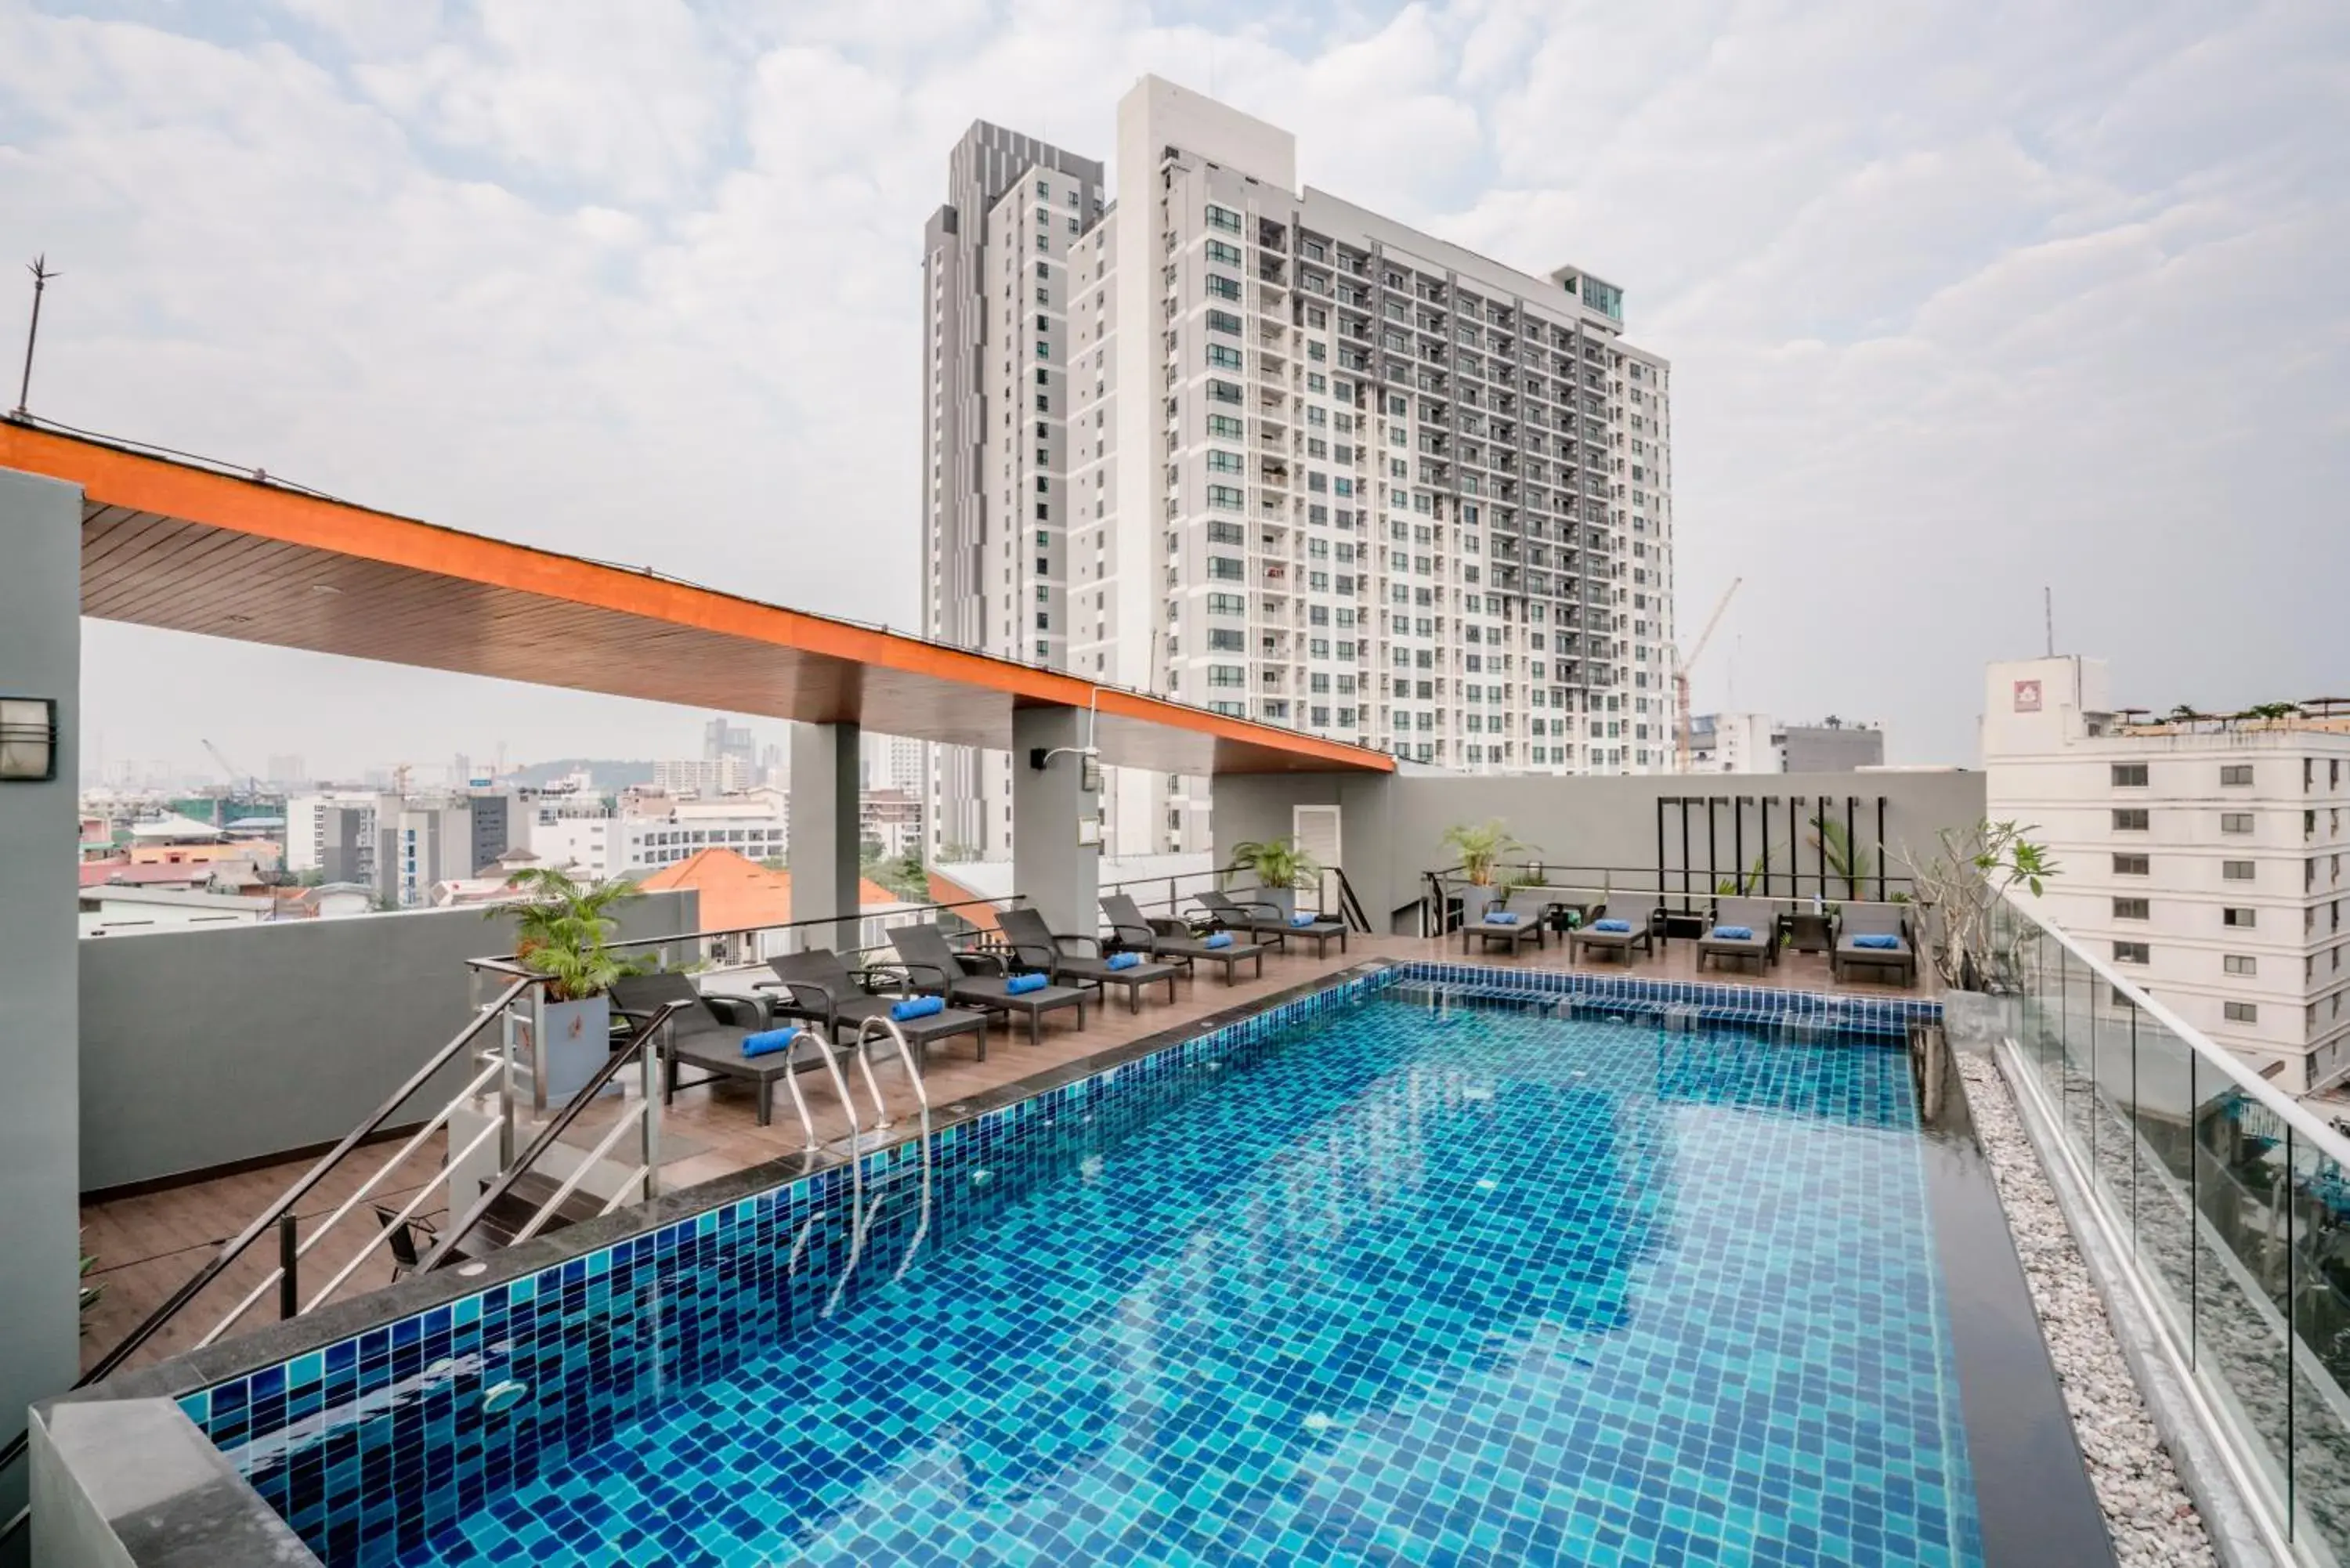 Property building, Swimming Pool in 247 Boutique Hotel